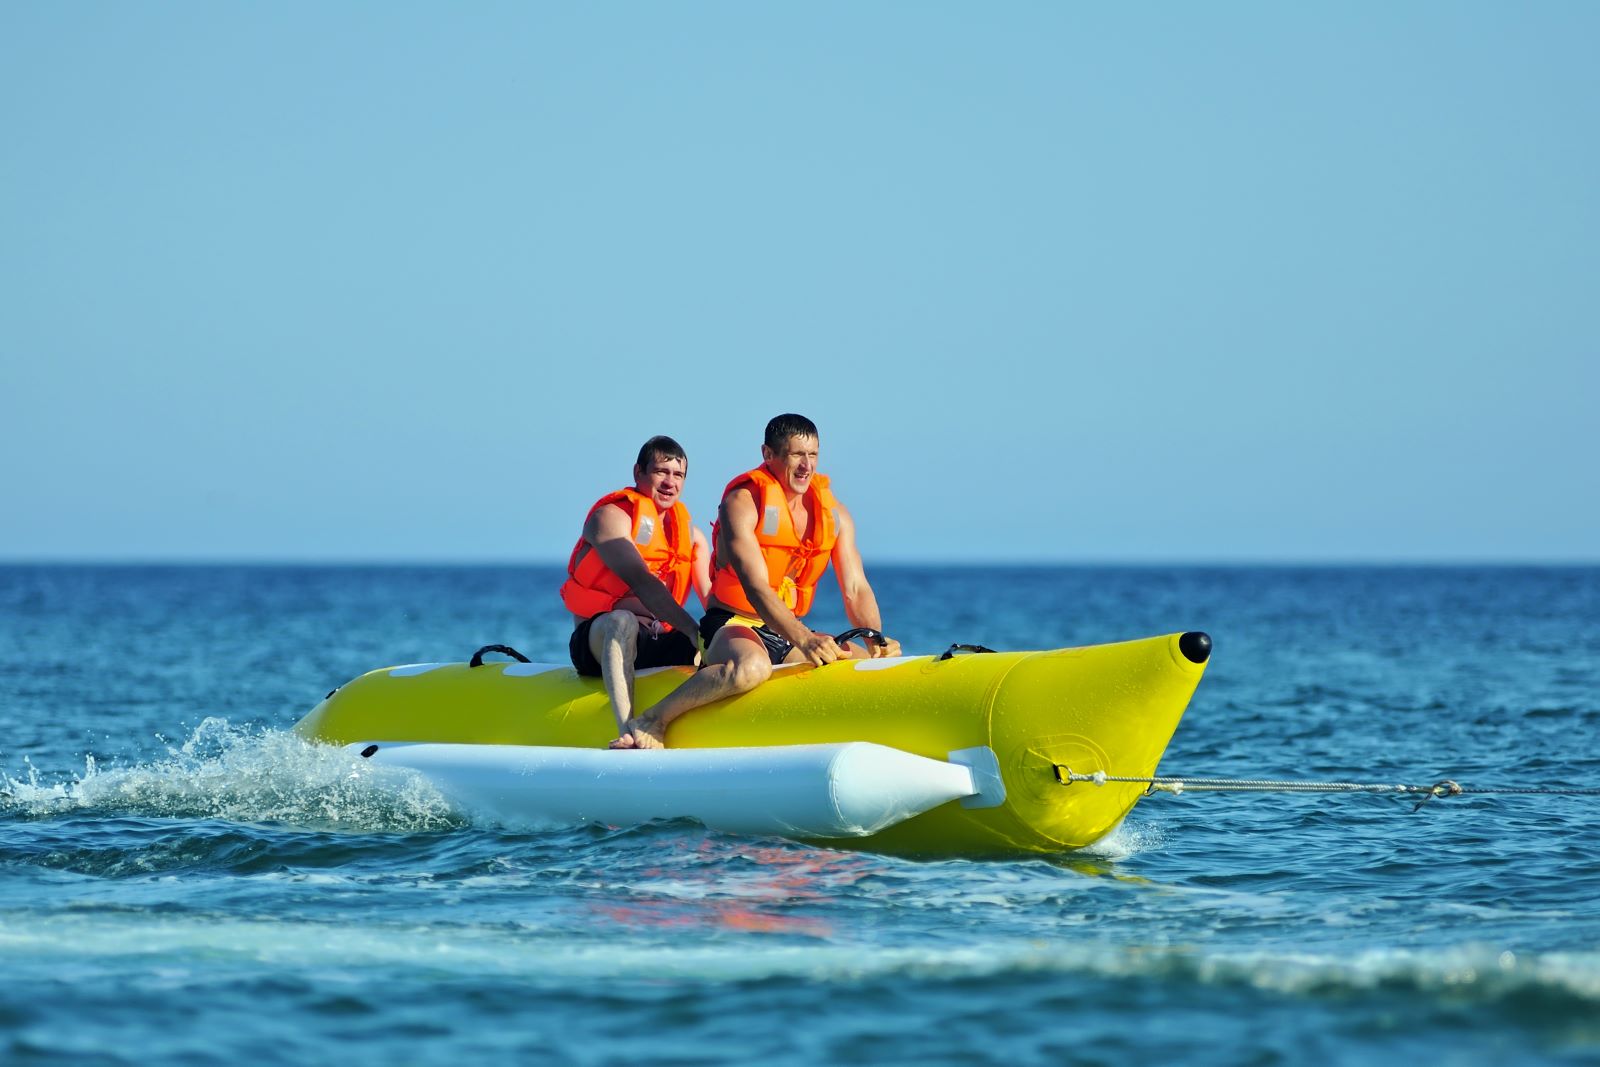 Two boys on the back of a banana boat on Anna Maria Island